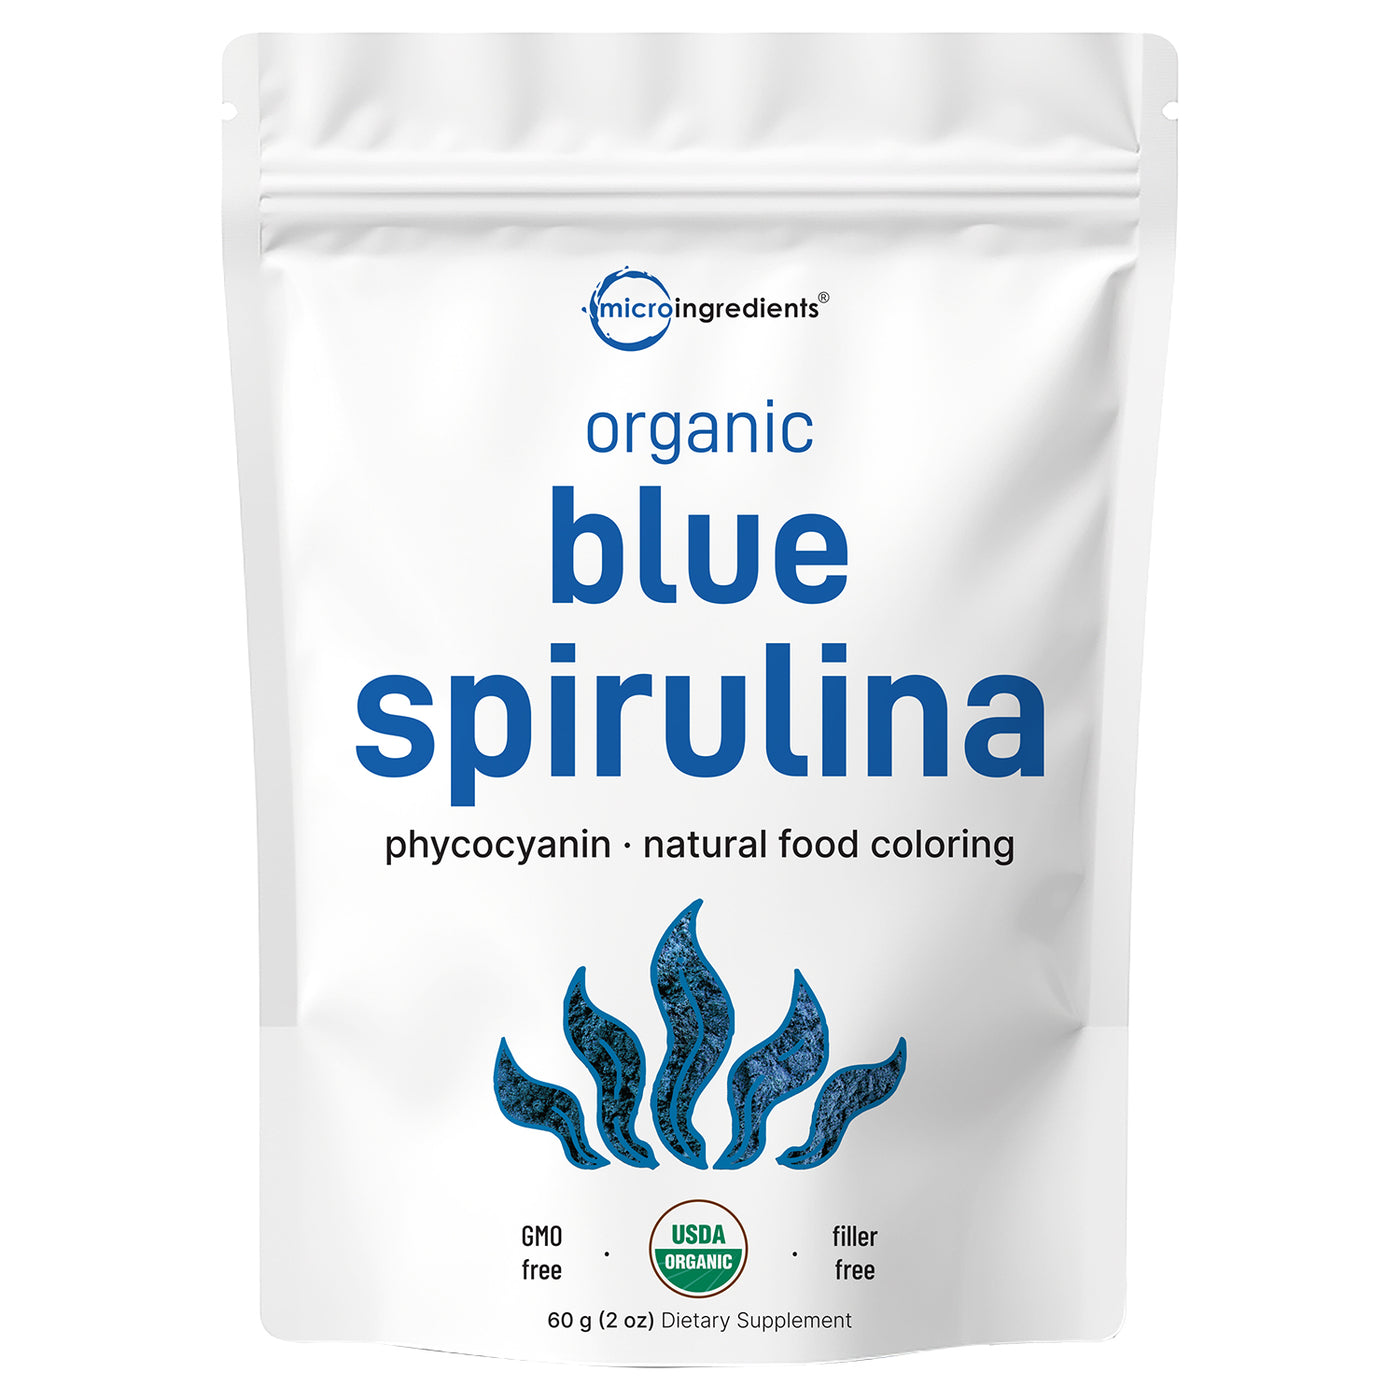 Organic Blue Spirulina Powder (Phycocyanin Extract), 60 Servings - No Fishy Smell, 100% Vegan Protein from Blue-Green Algae